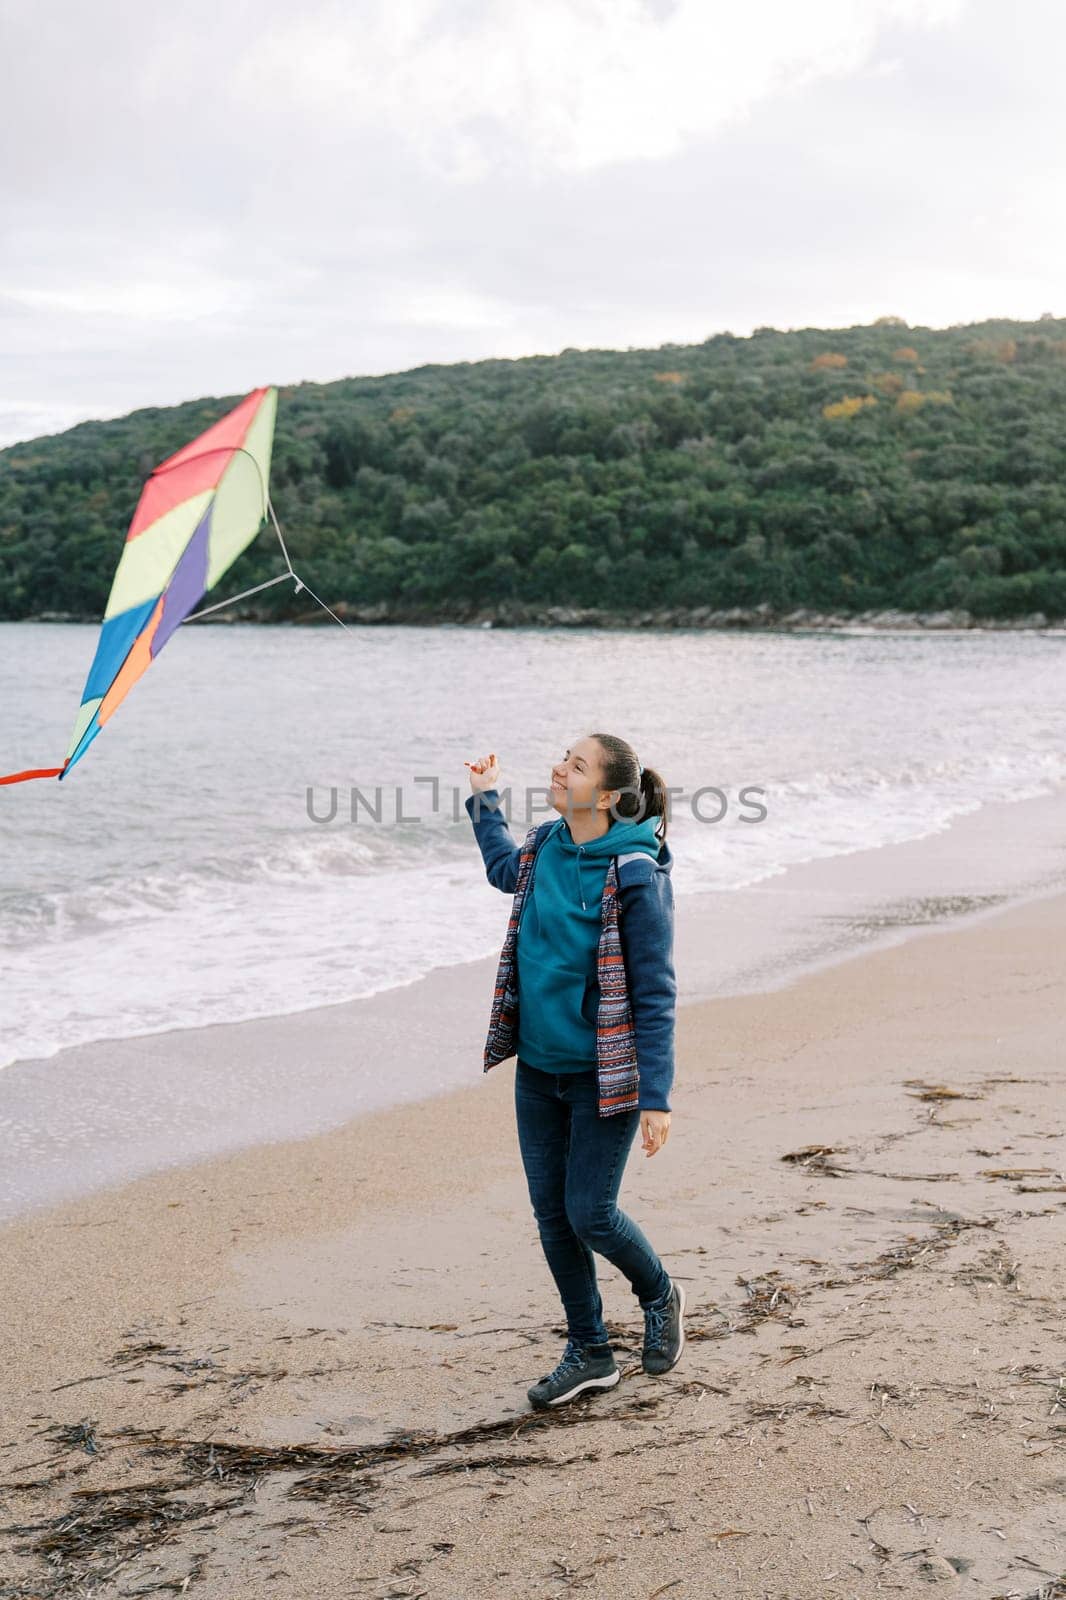 Smiling girl walking along the seashore with a colorful kite on a string by Nadtochiy